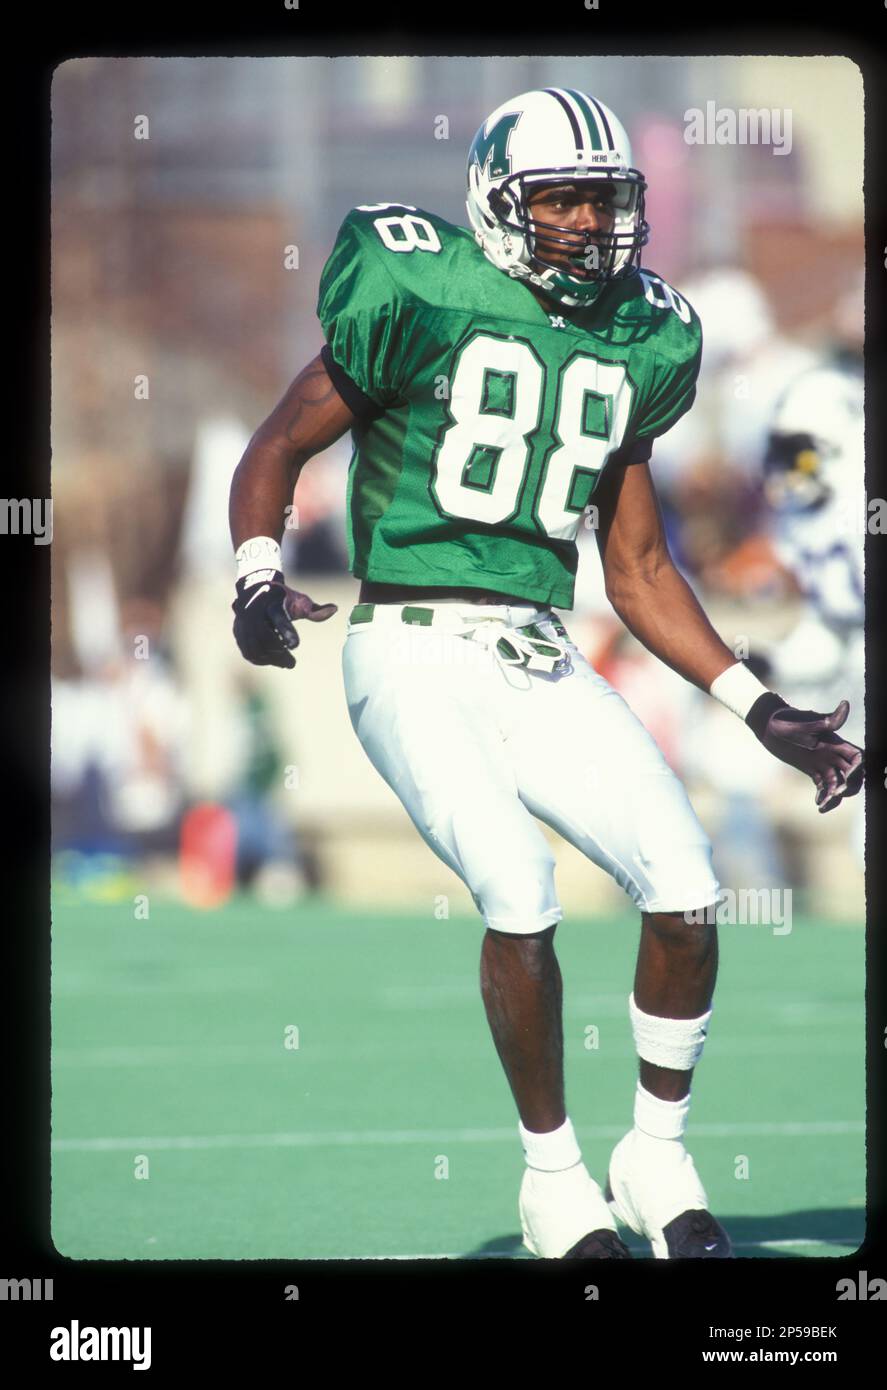 https://c8.alamy.com/comp/2P59BEK/randy-moss-wide-receiver-shown-in-action-during-the-1996-season-for-the-marshall-university-thundering-herd-moss-played-at-marshall-in-1996-and-1997-he-was-chosen-with-the-21st-pick-in-the-1998-nfl-draft-by-the-minnesota-vikings-the-7-time-pro-bowler-also-played-for-the-oakland-raiders-new-england-patriots-tennessee-titans-and-san-francisco-49ersap-photobruce-schwartzman-2P59BEK.jpg